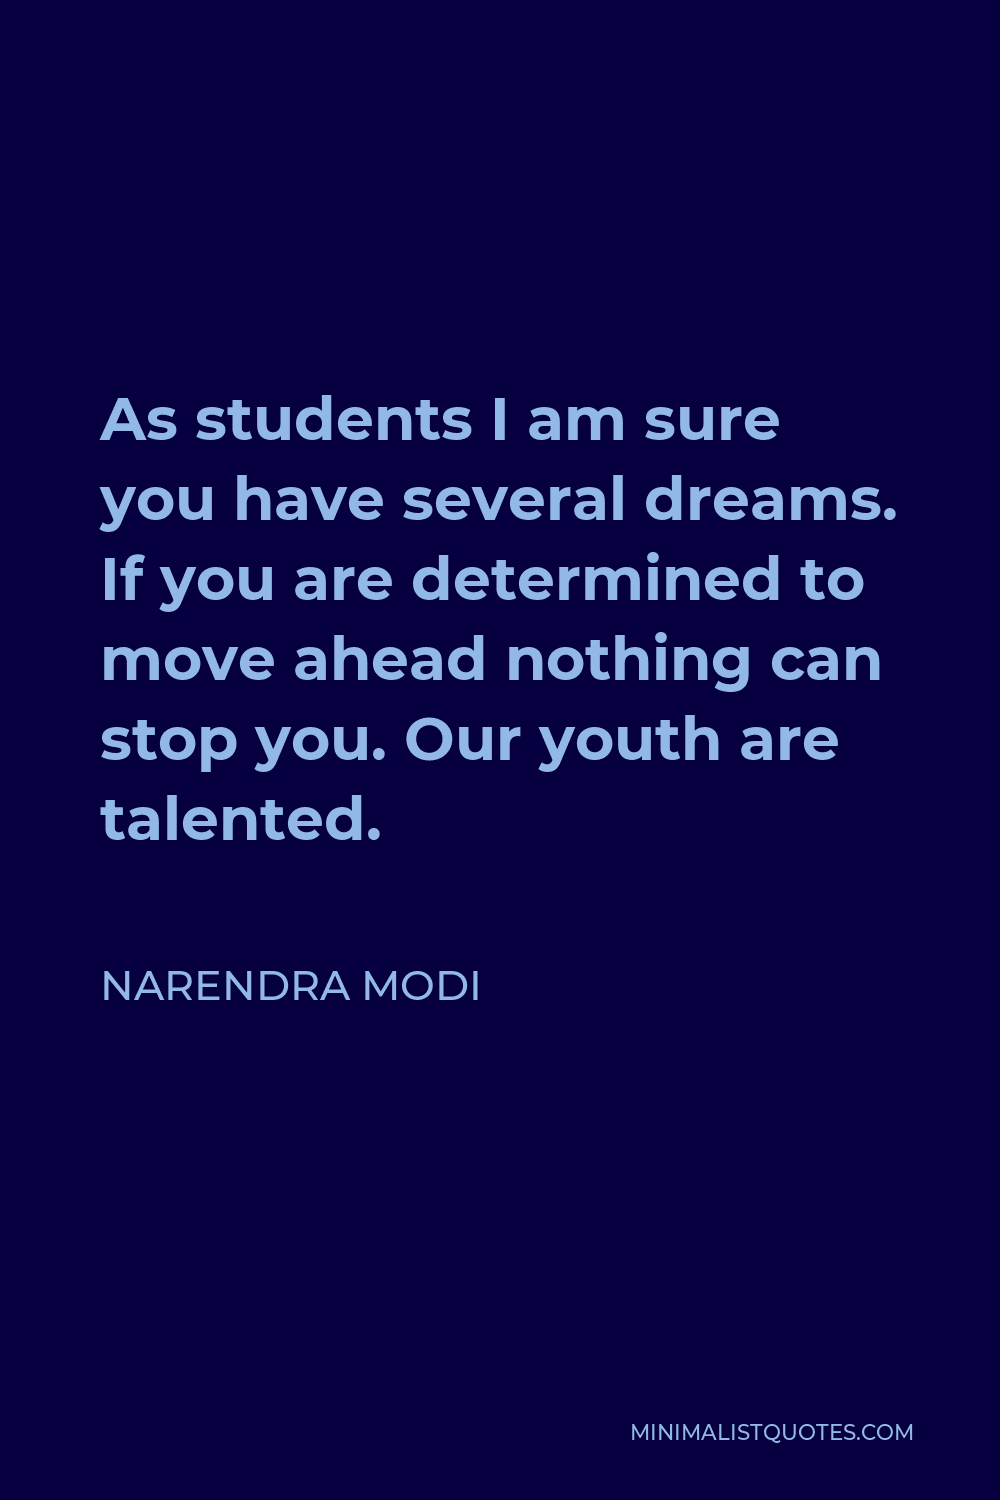 Narendra Modi Quote - As students I am sure you have several dreams. If you are determined to move ahead nothing can stop you. Our youth are talented.